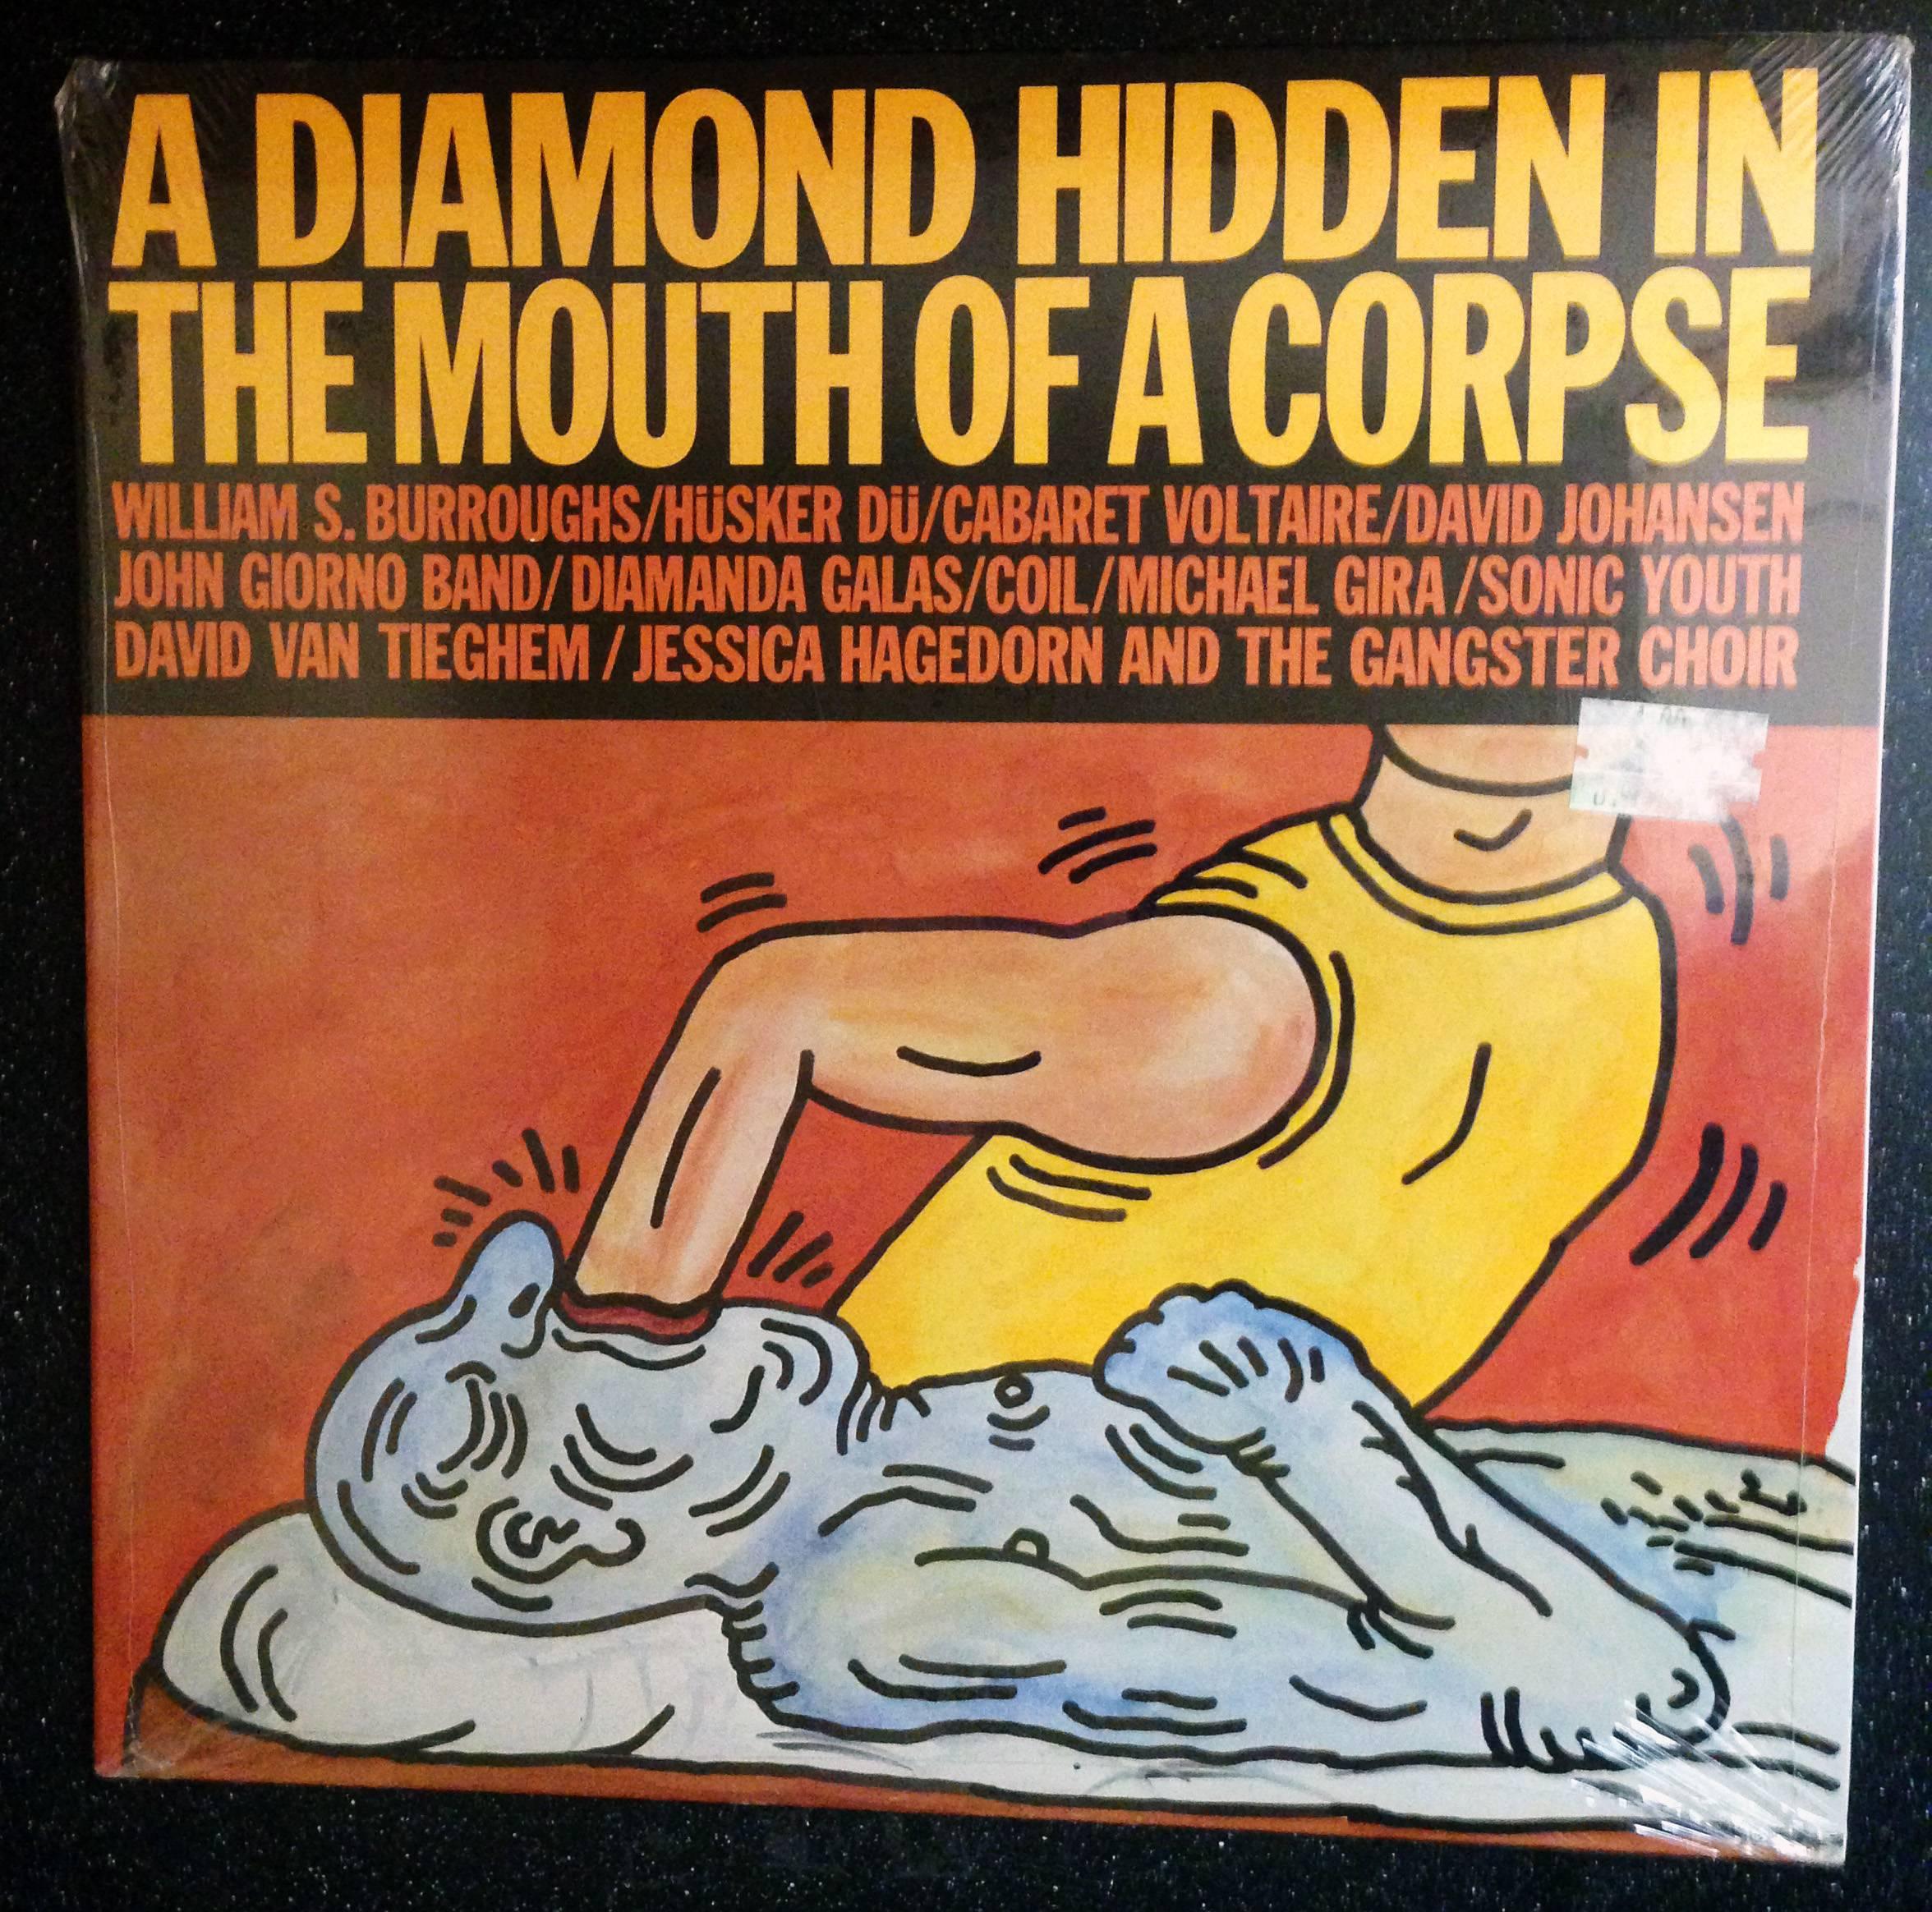 “A Diamond Hidden in the Mouth of a Corpse,” A Rare Highly Sought After 1985 Vinyl Art Cover featuring Original Artwork by Keith Haring; new/sealed in its original packaging.

In addition to the front and back cover art by Haring, this work